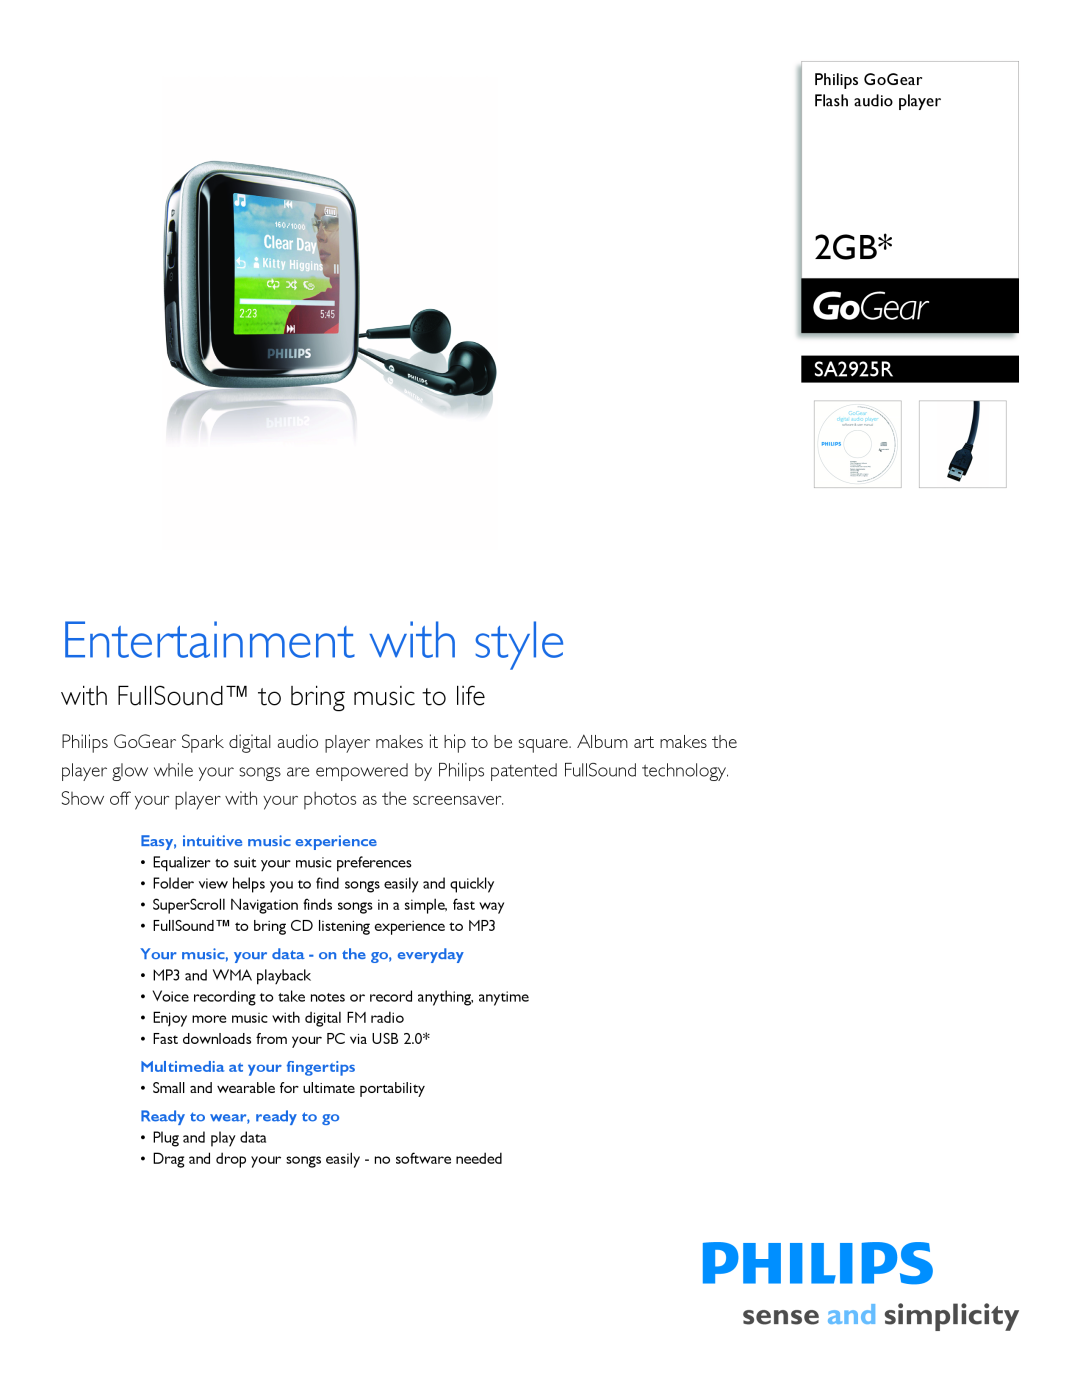 Philips SA2925R/37 manual Philips GoGear Flash audio player, Entertainment with style 